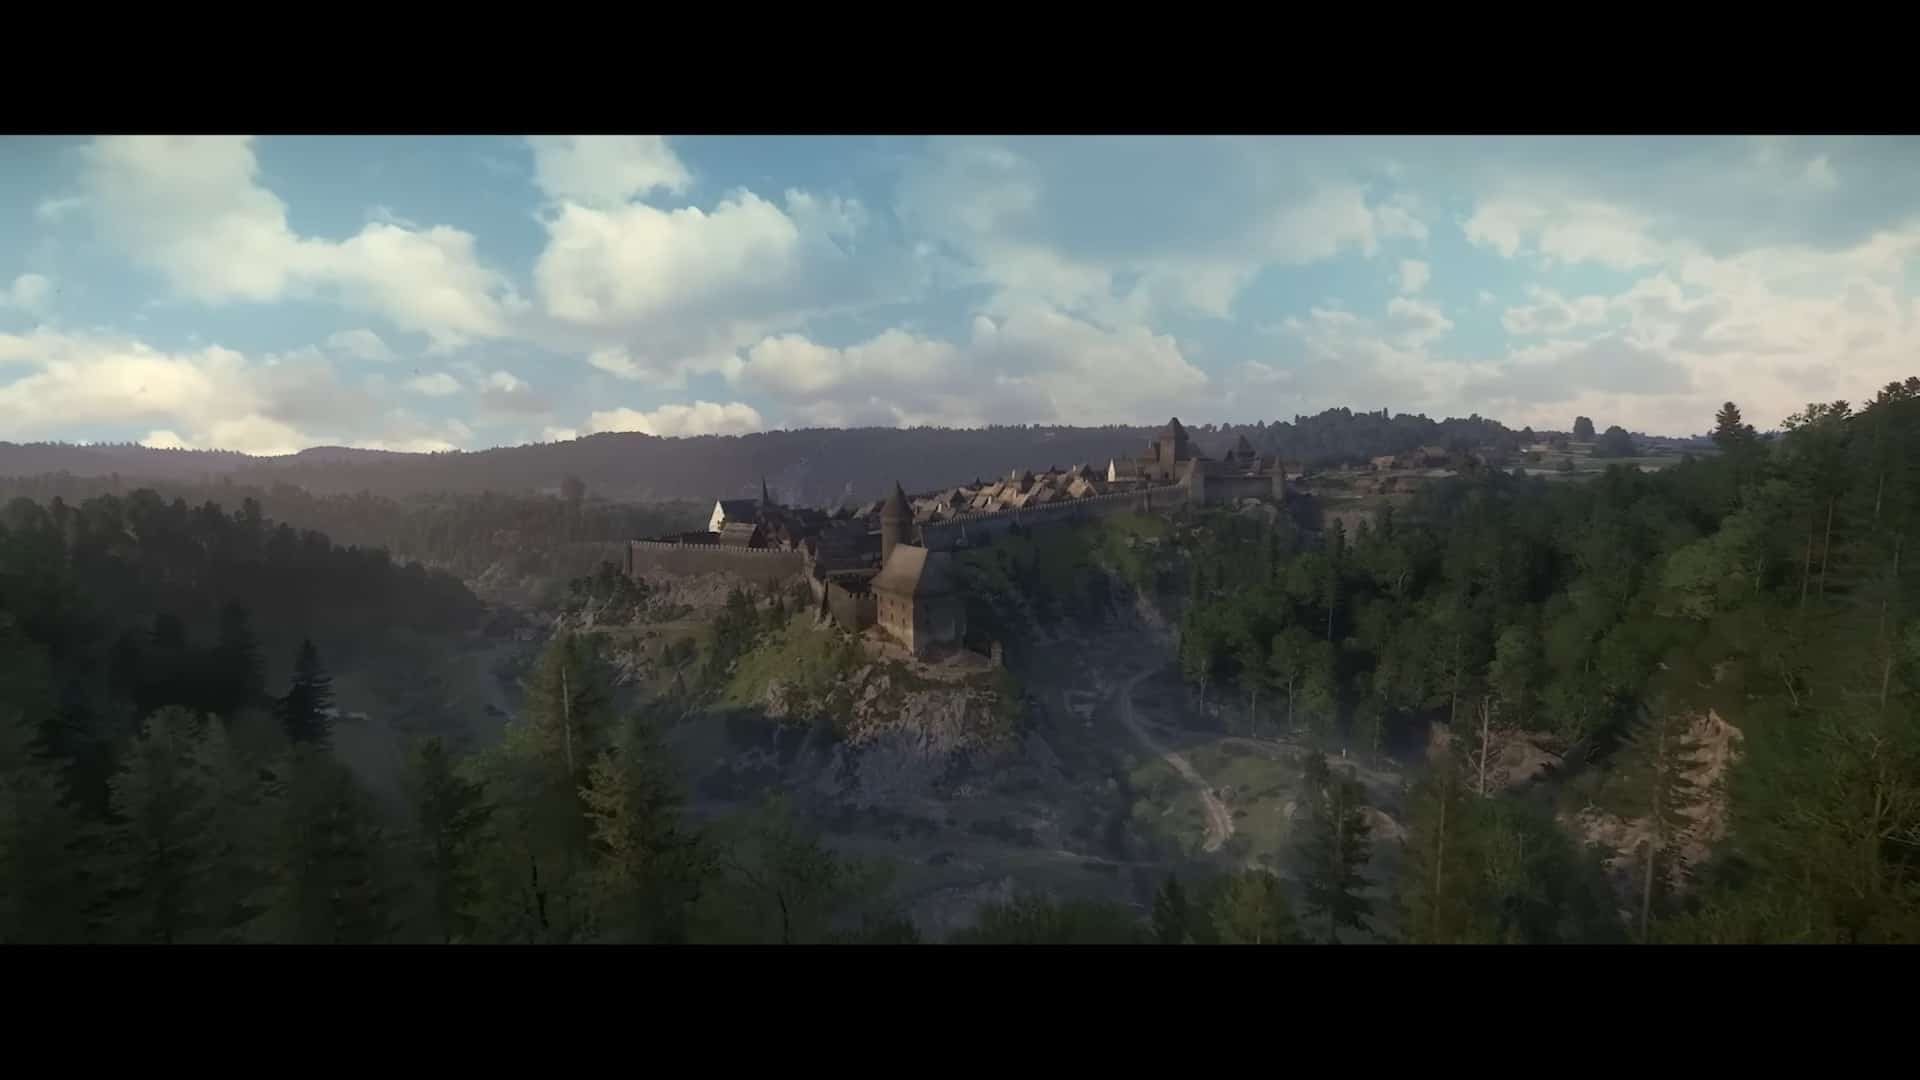 Kingdom Come Deliverance cheats: A castle and town in the middle of forest.